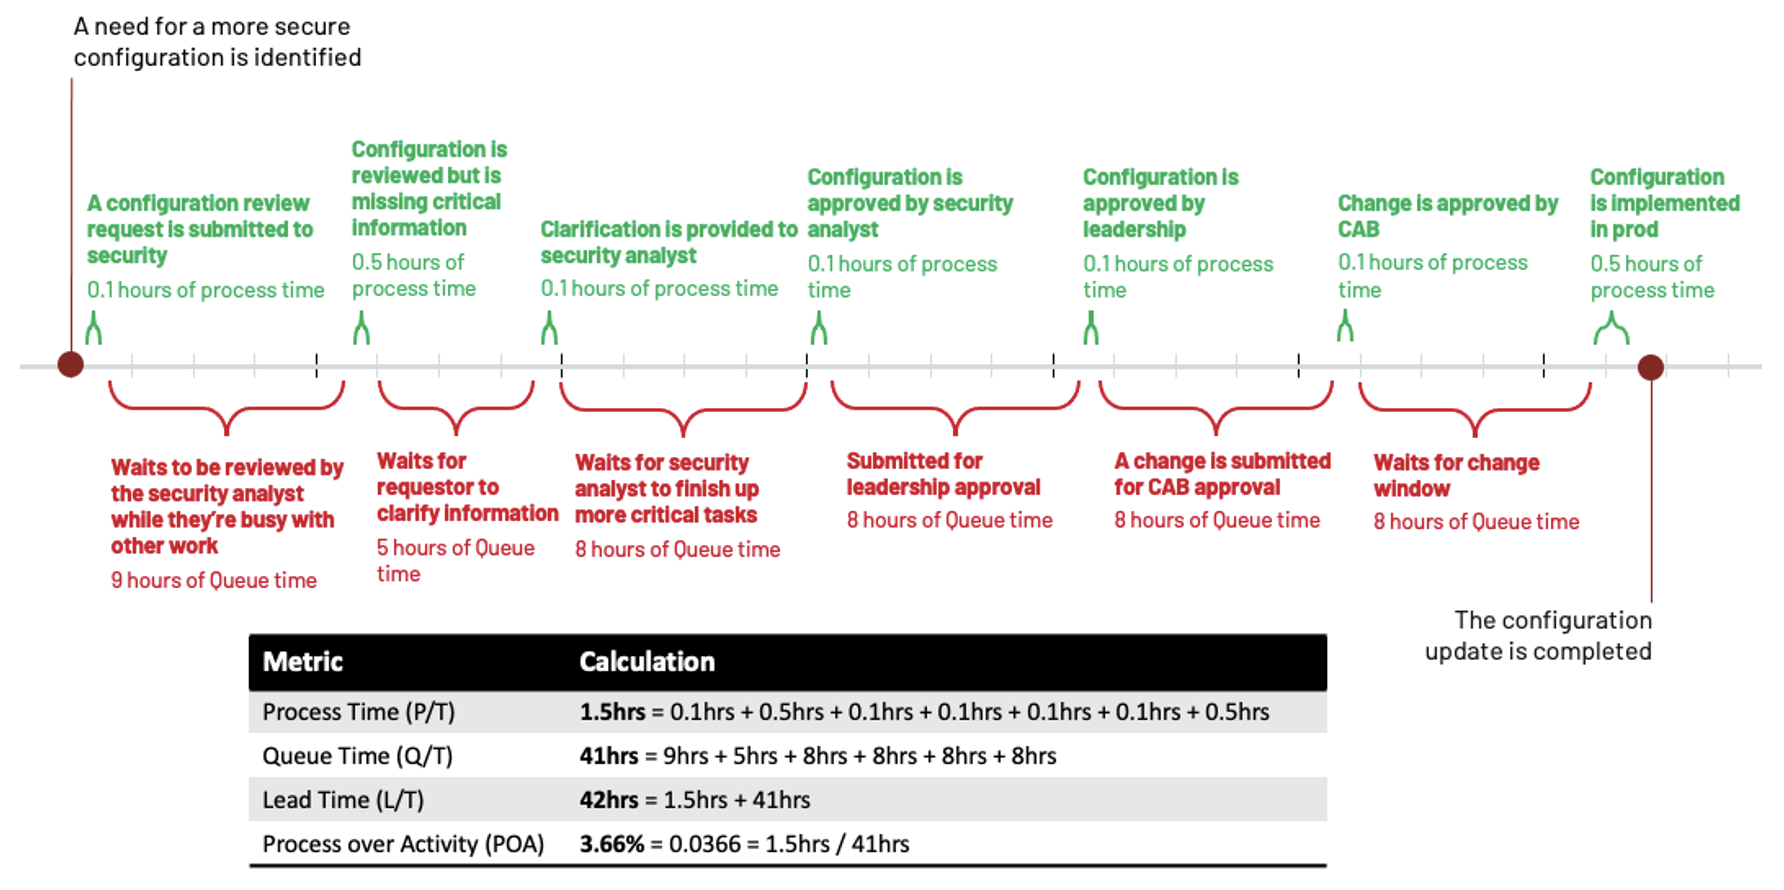 A sample security configuration review and update process with examples of Process Time (P/T), Queue Time (Q/T), Lead Time (LT), and Process Over Activity (POA) metrics